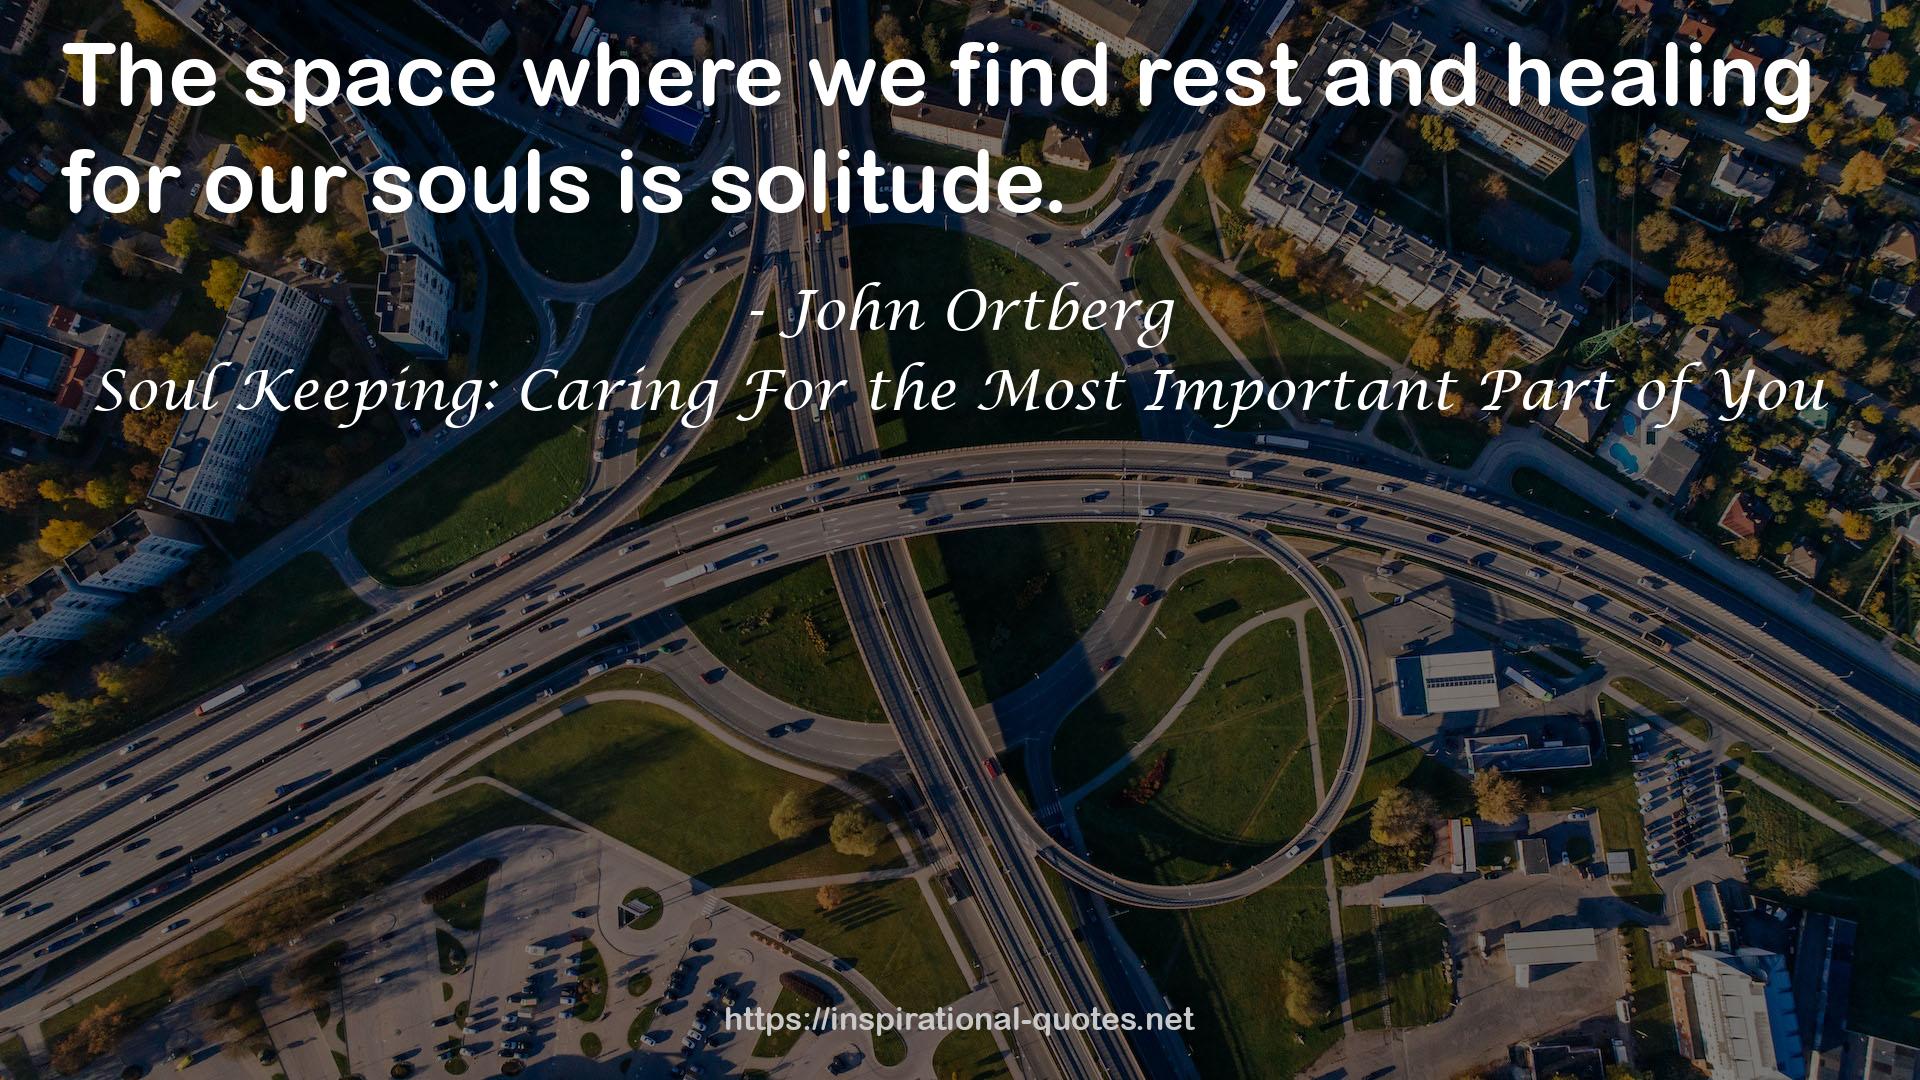 Soul Keeping: Caring For the Most Important Part of You QUOTES